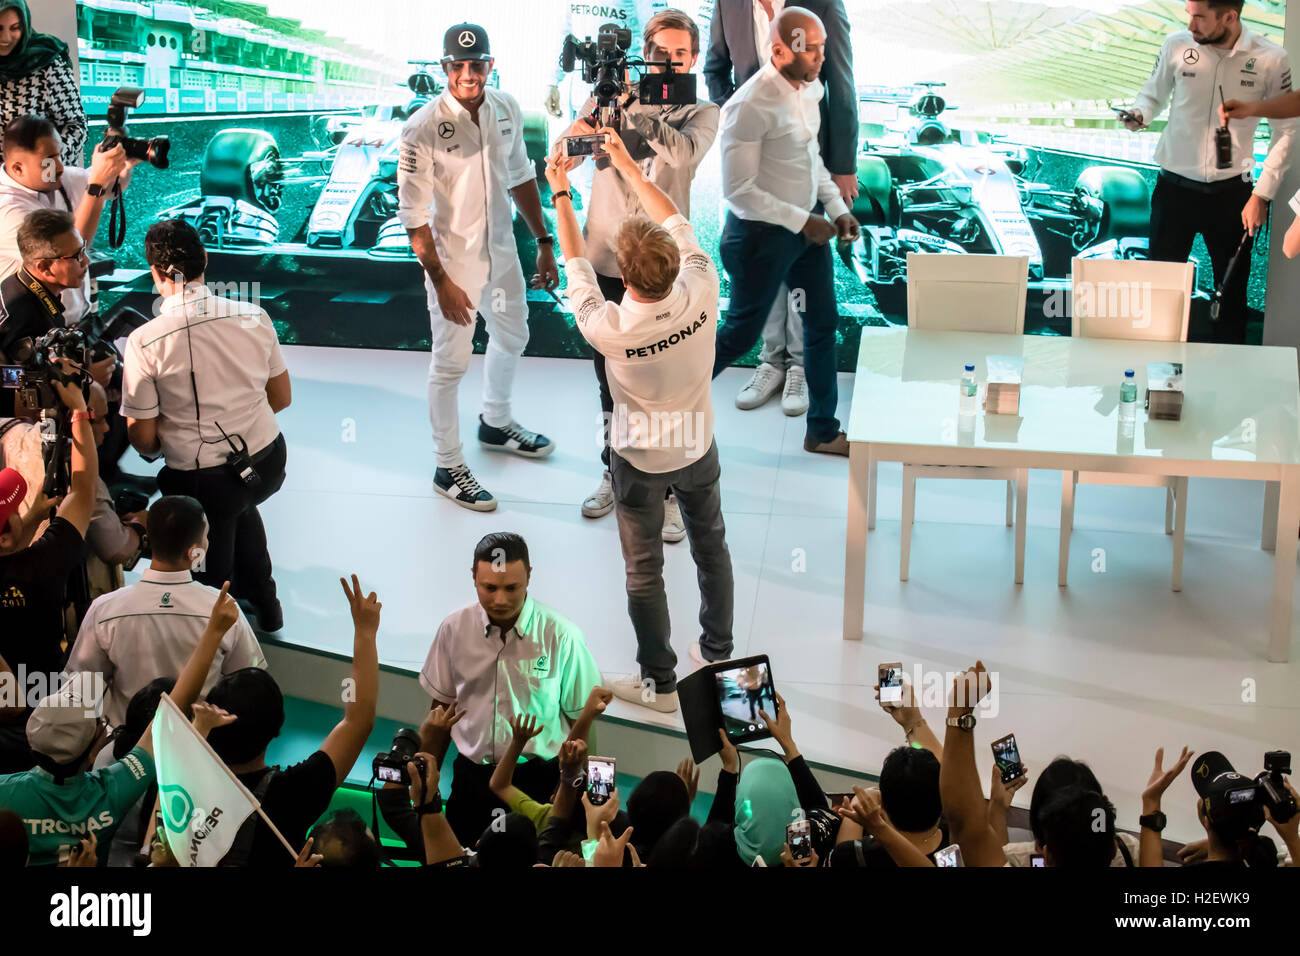 Kuala Lumpur, Malaysia. 27th Sept, 2016. Meet the Fans Session by Mercedes F1 drivers Lewis Hamilton and Nico Rosberg in Petronas KLCC shopping mall. Credit:  Danny Chan/Alamy Live News. Stock Photo